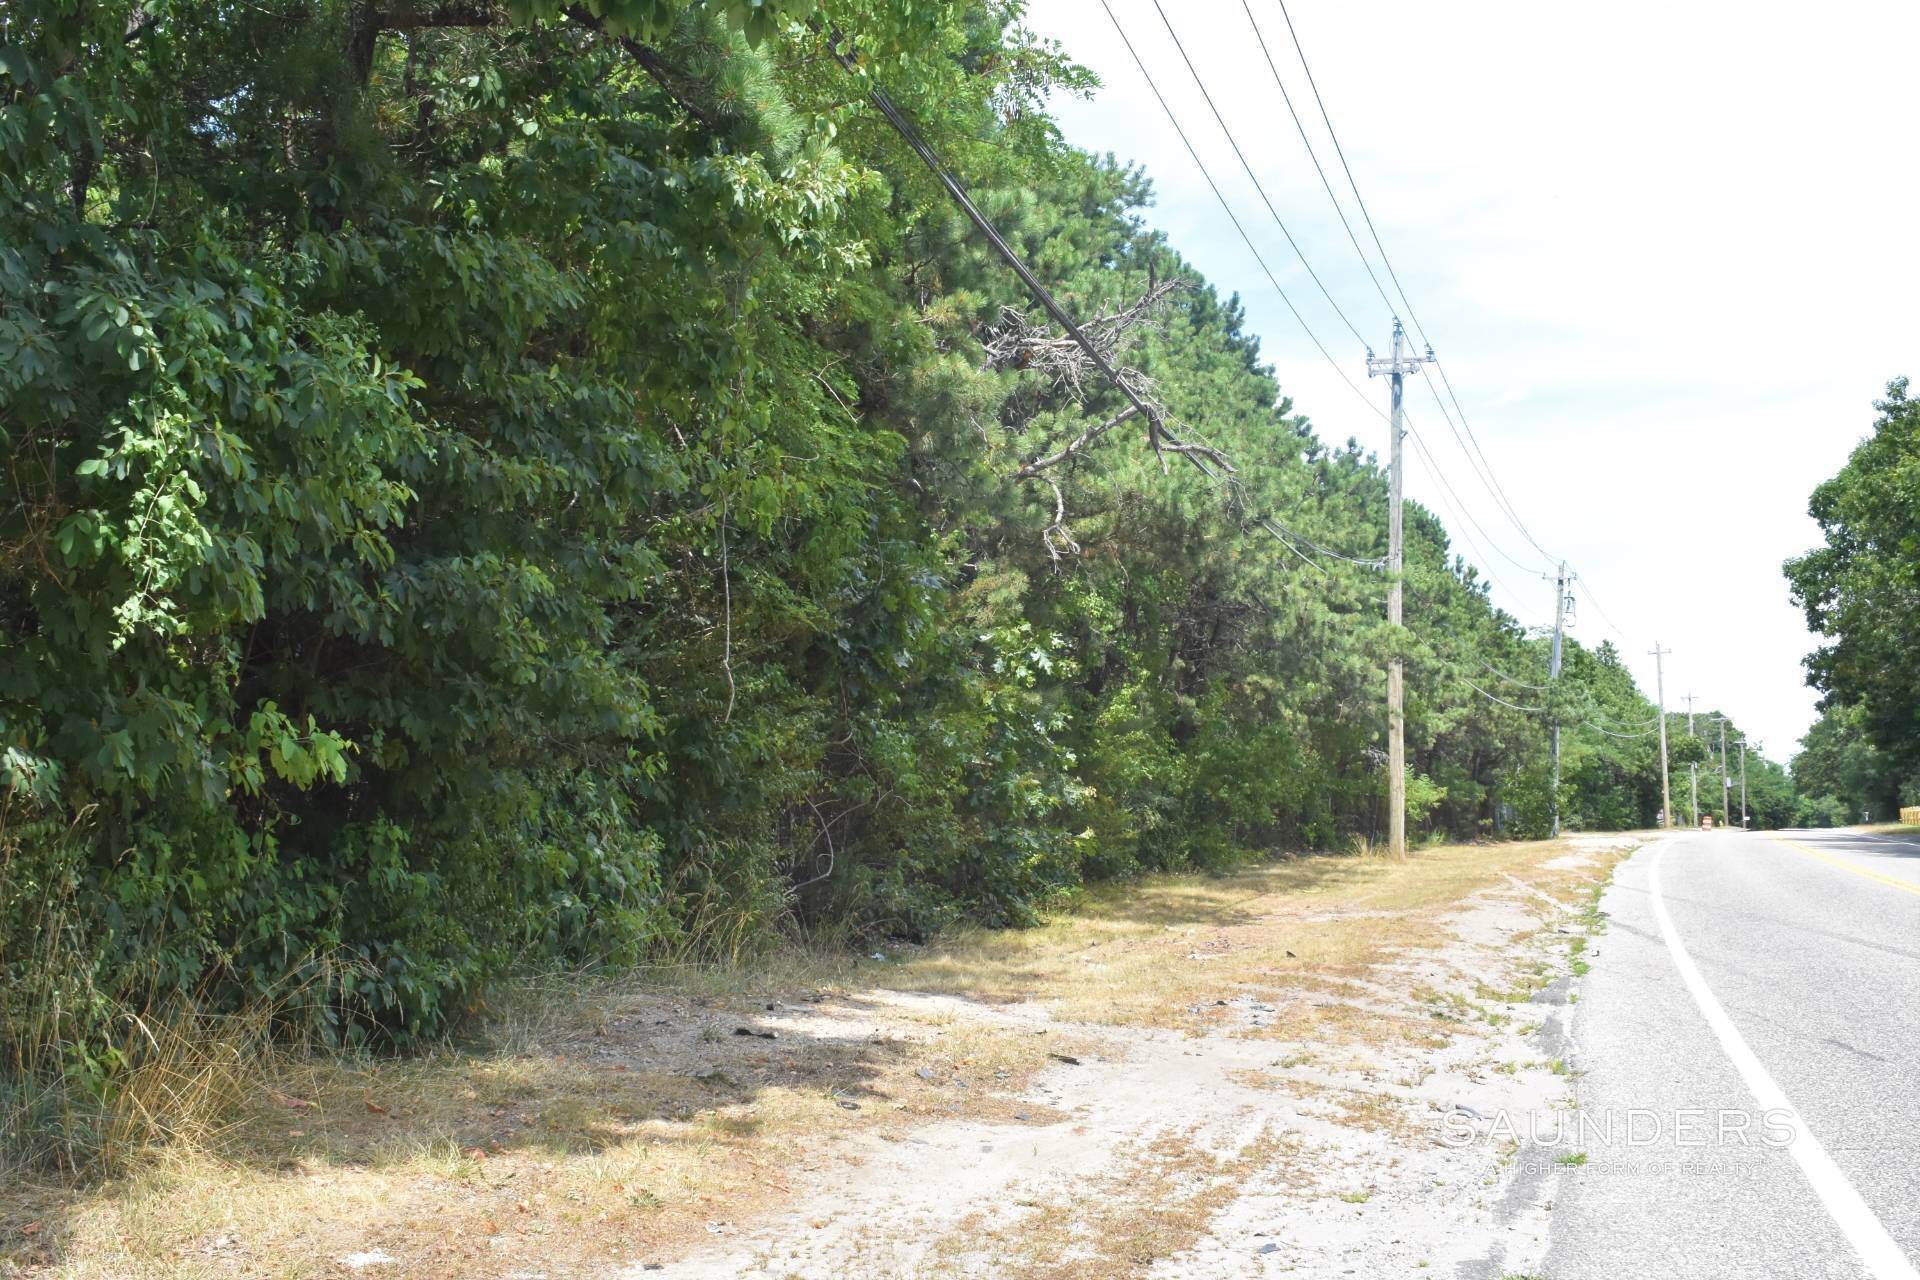 16. Land for Sale at Development Opportunity Quiogue Westhampton Beach 72 & 82 & 86 South Country Road, Quiogue, NY 11978